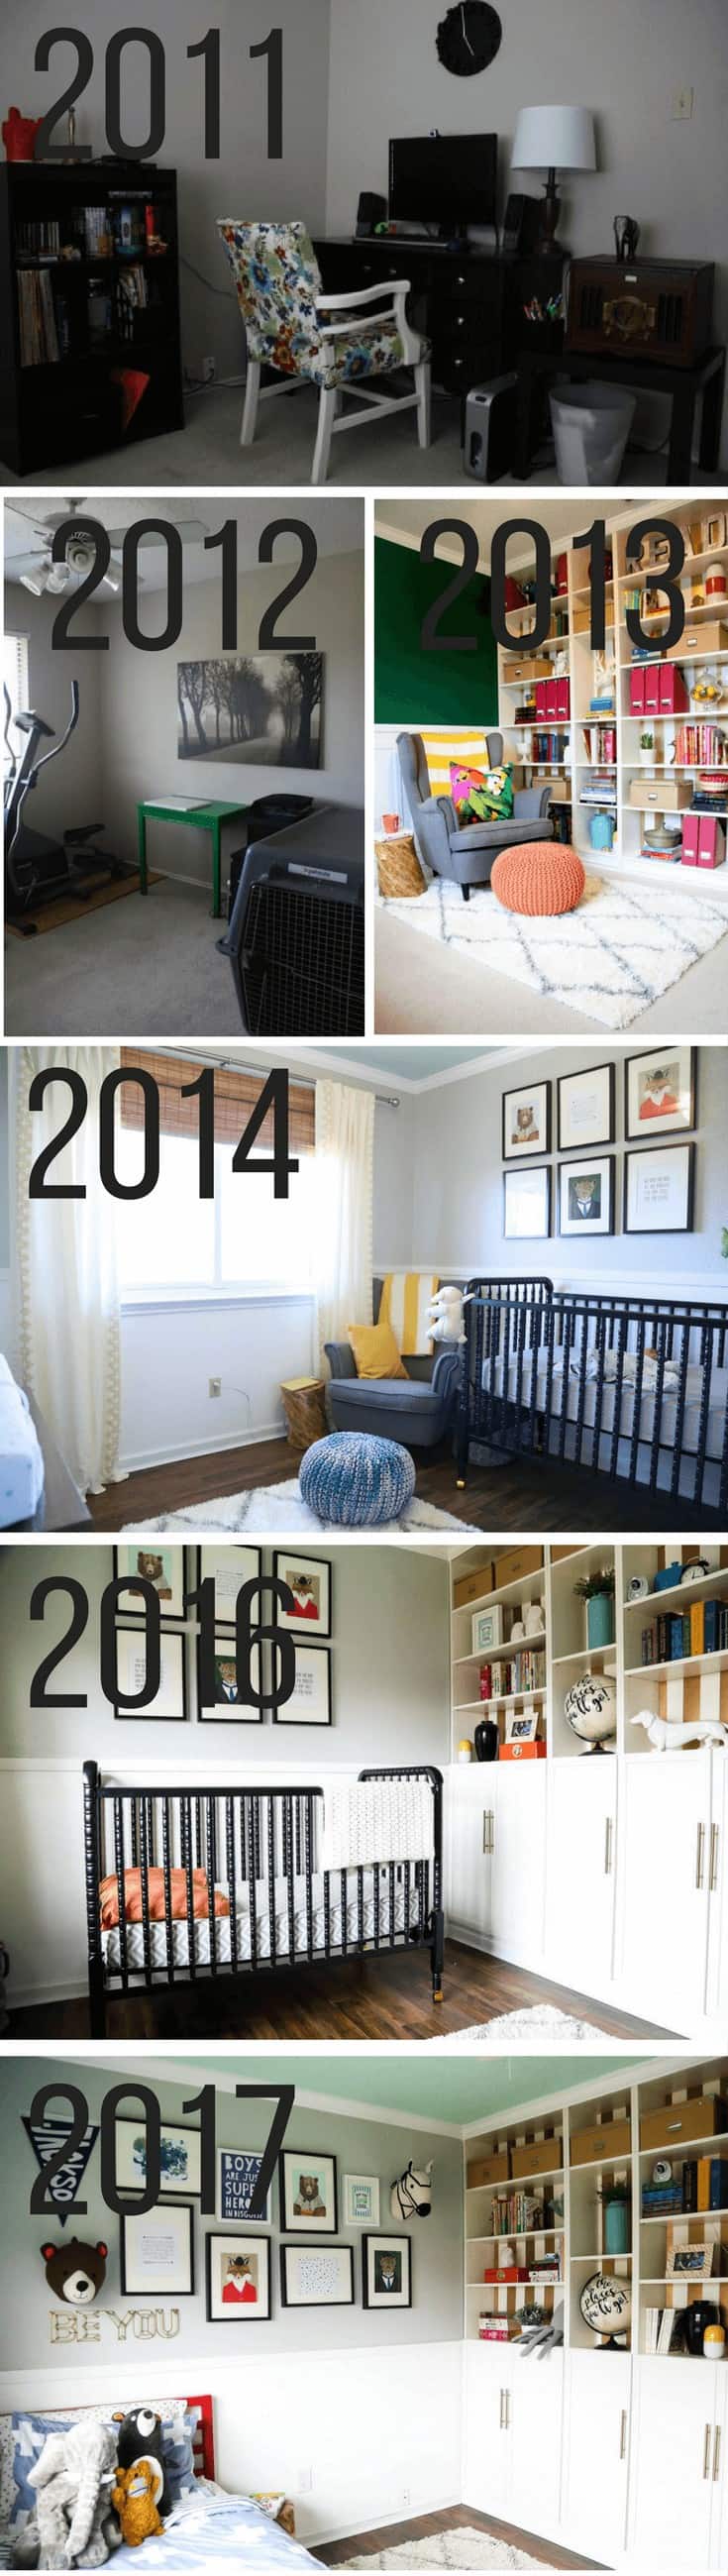 The Bedrooms – Before & After